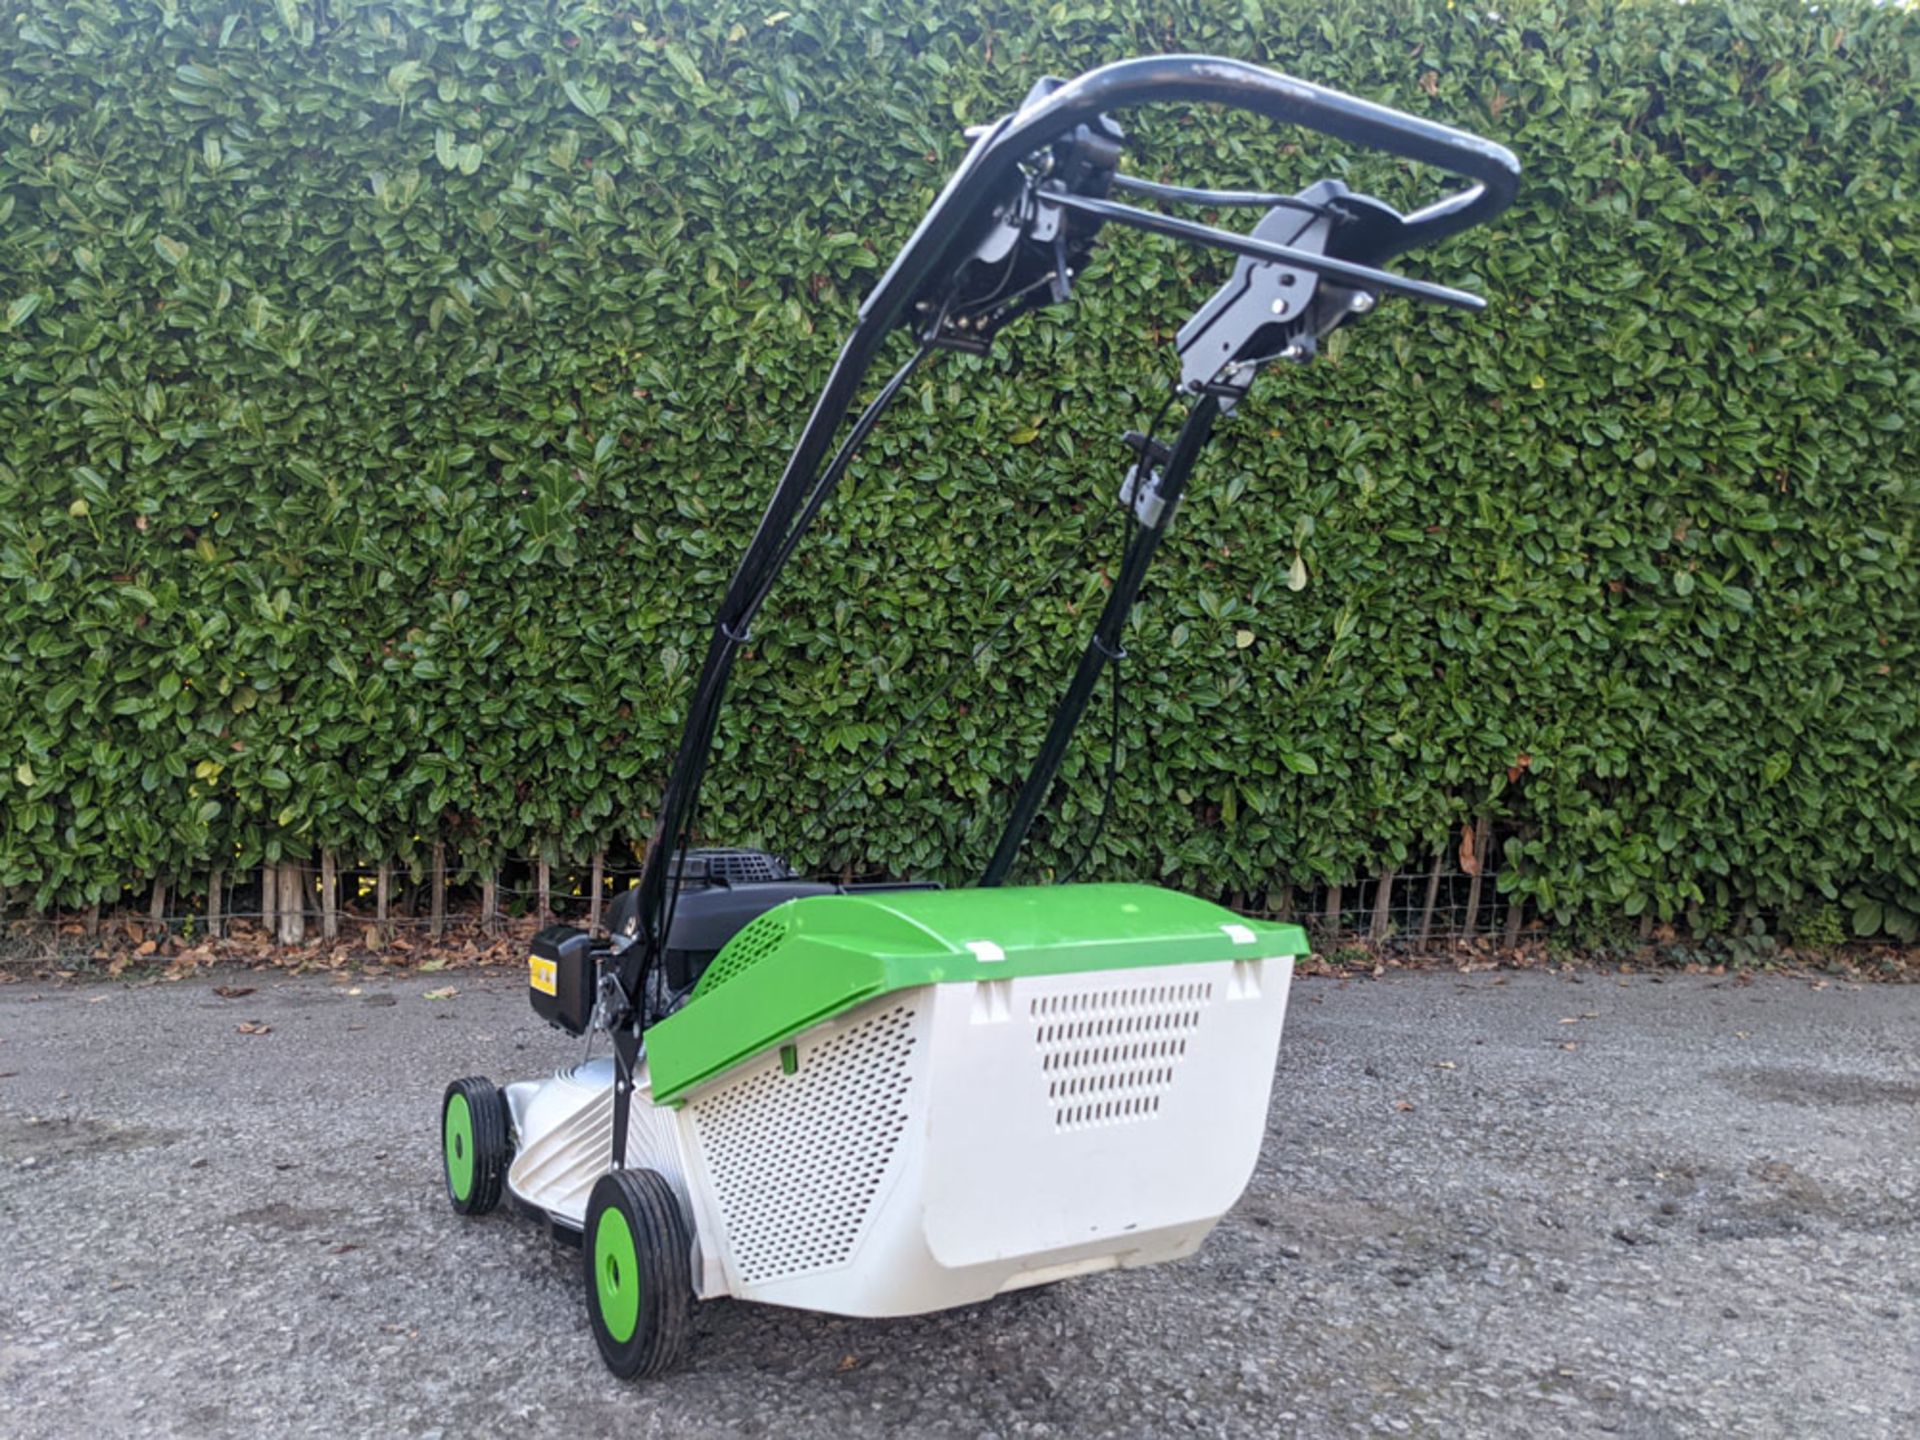 2019 Etesia Pro 46 PHCT 18" Self Propelled Lawn Mower - Image 5 of 5